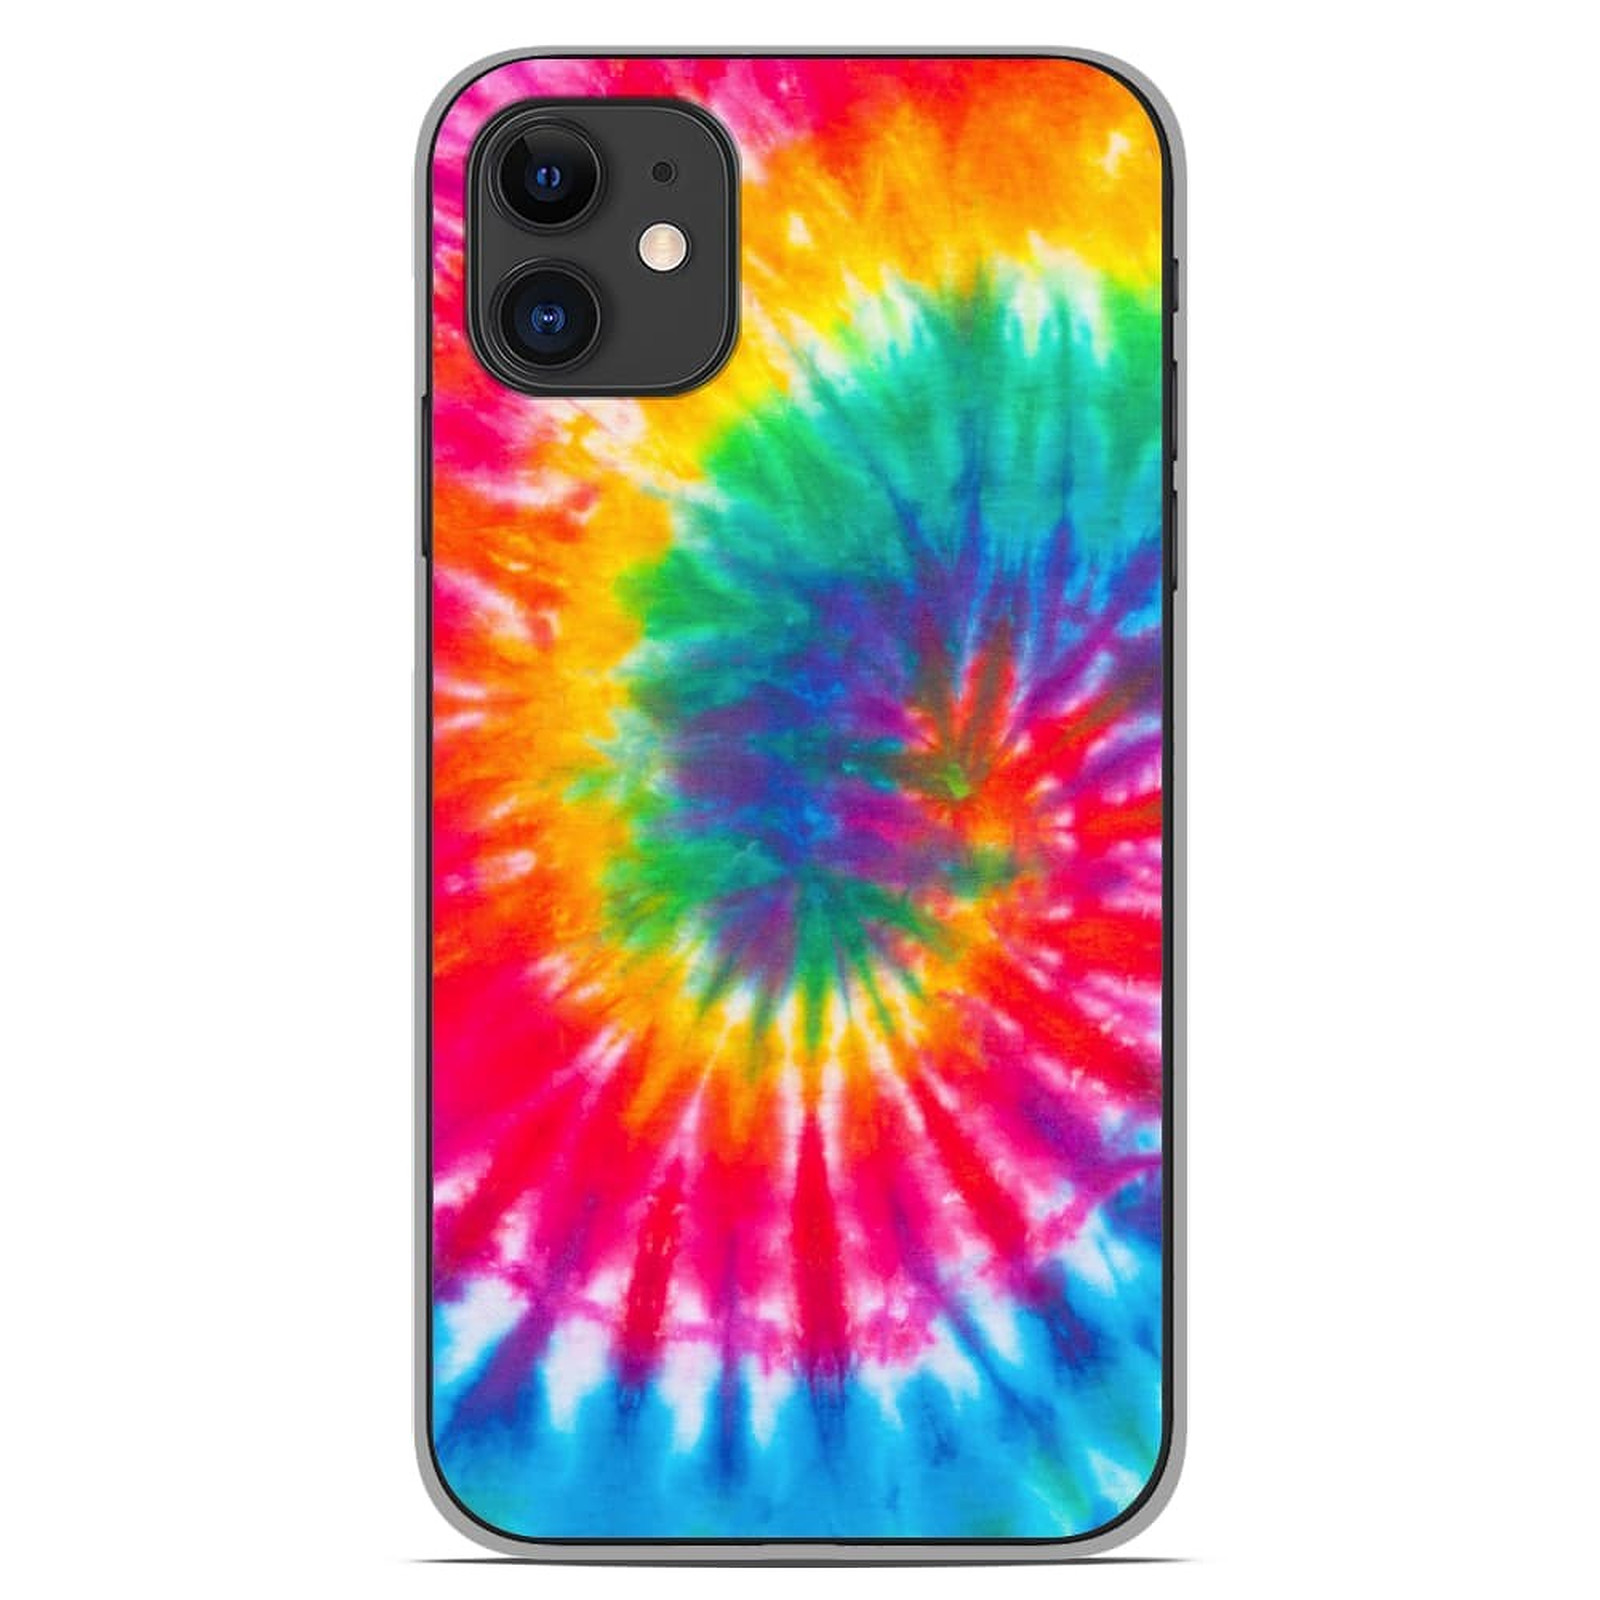 1001 Coques Coque silicone gel Apple iPhone 11 motif Tie Dye Spirale - Coque telephone 1001Coques